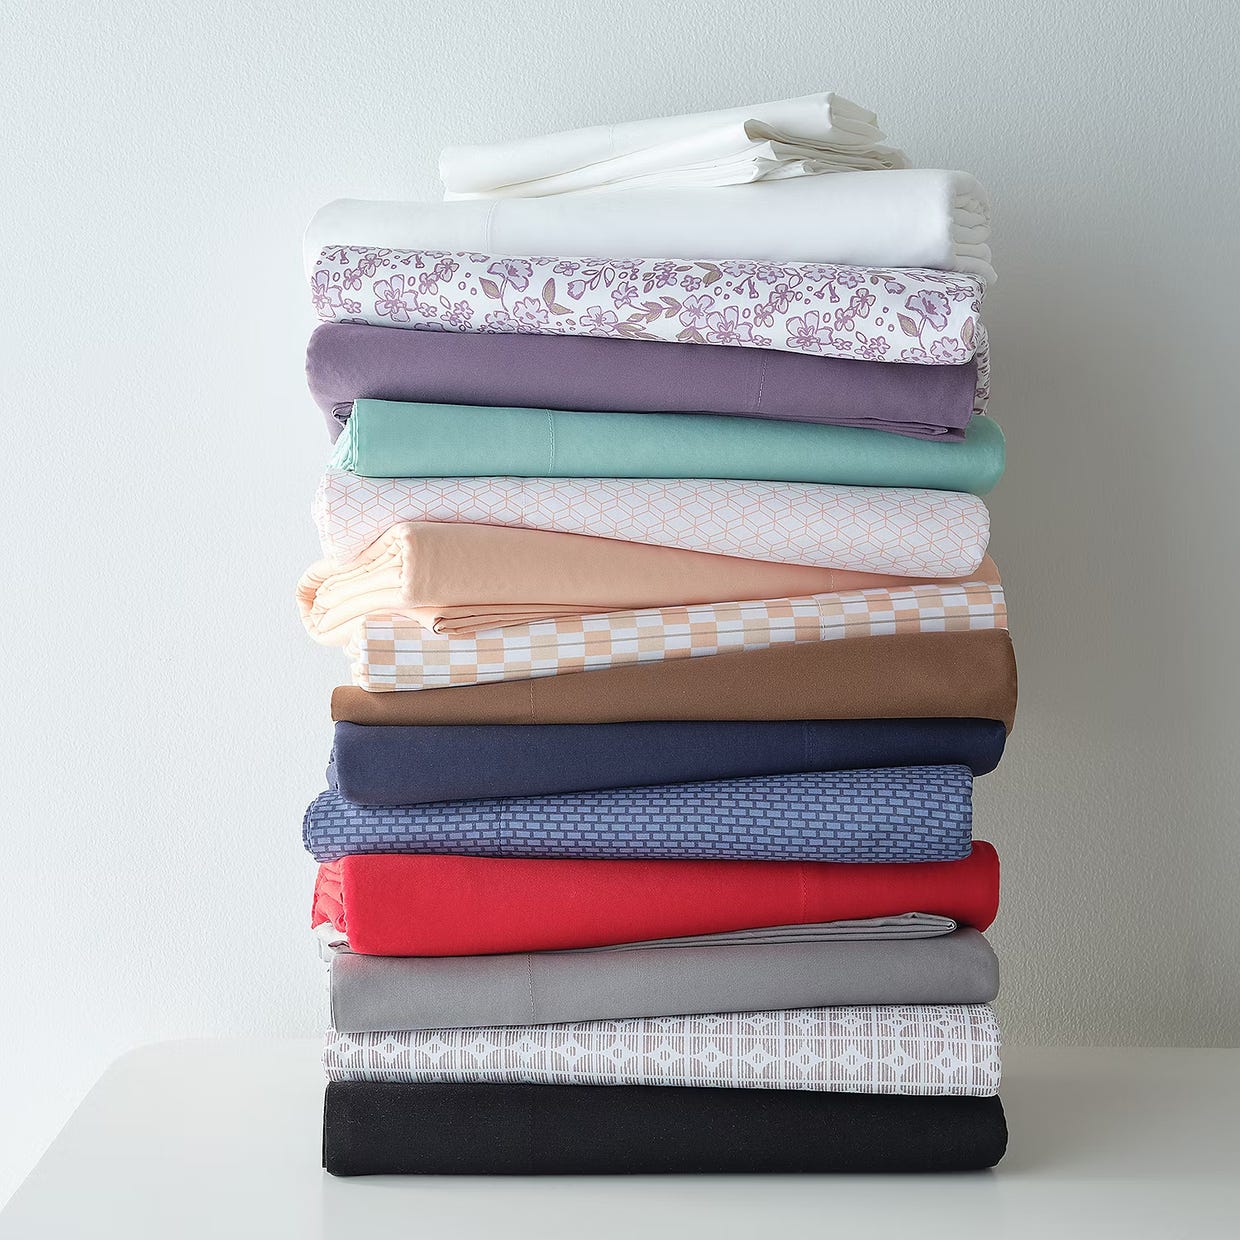 A stack of neatly folded fabrics in various colors and patterns on a white surface.